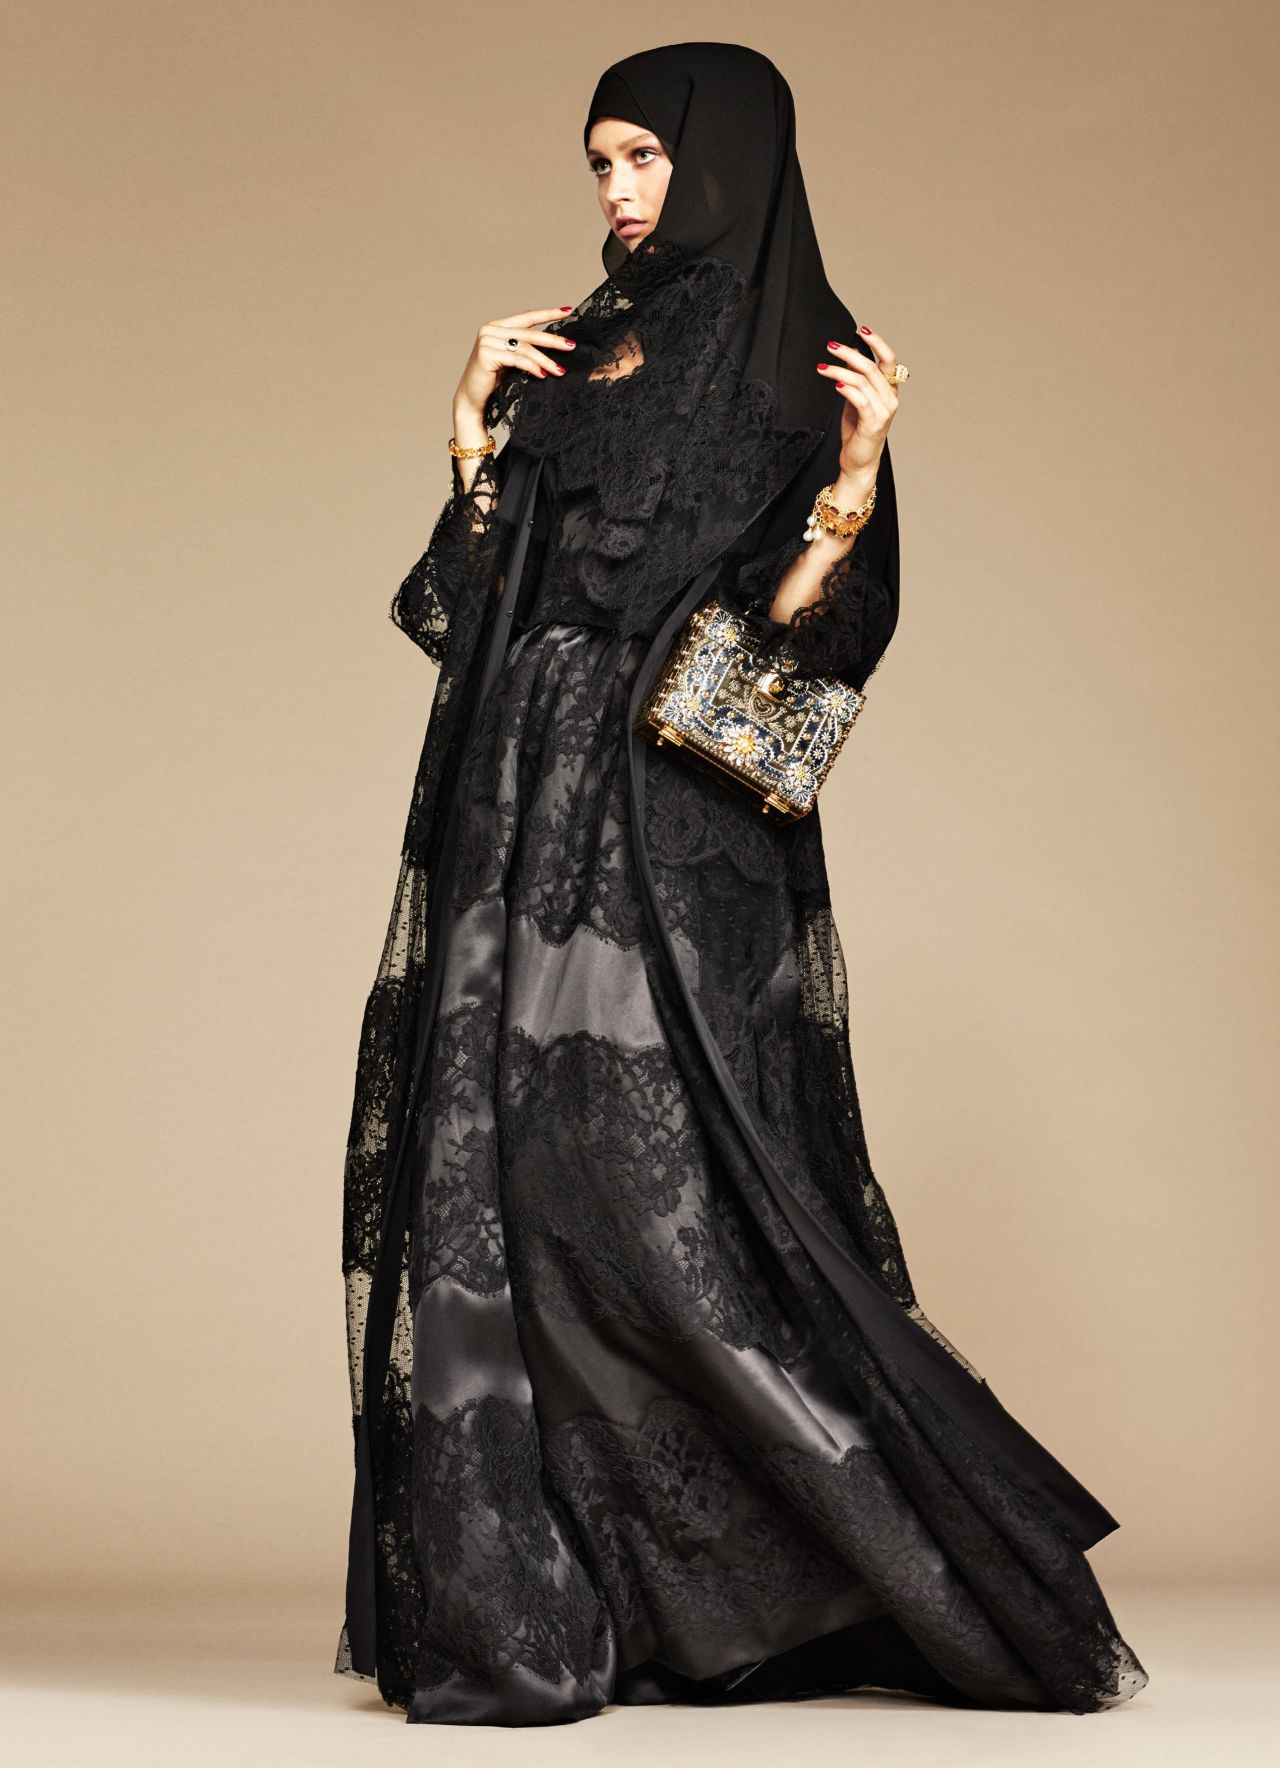 The collection was first revealed on Style.com/Arabia on January 3.